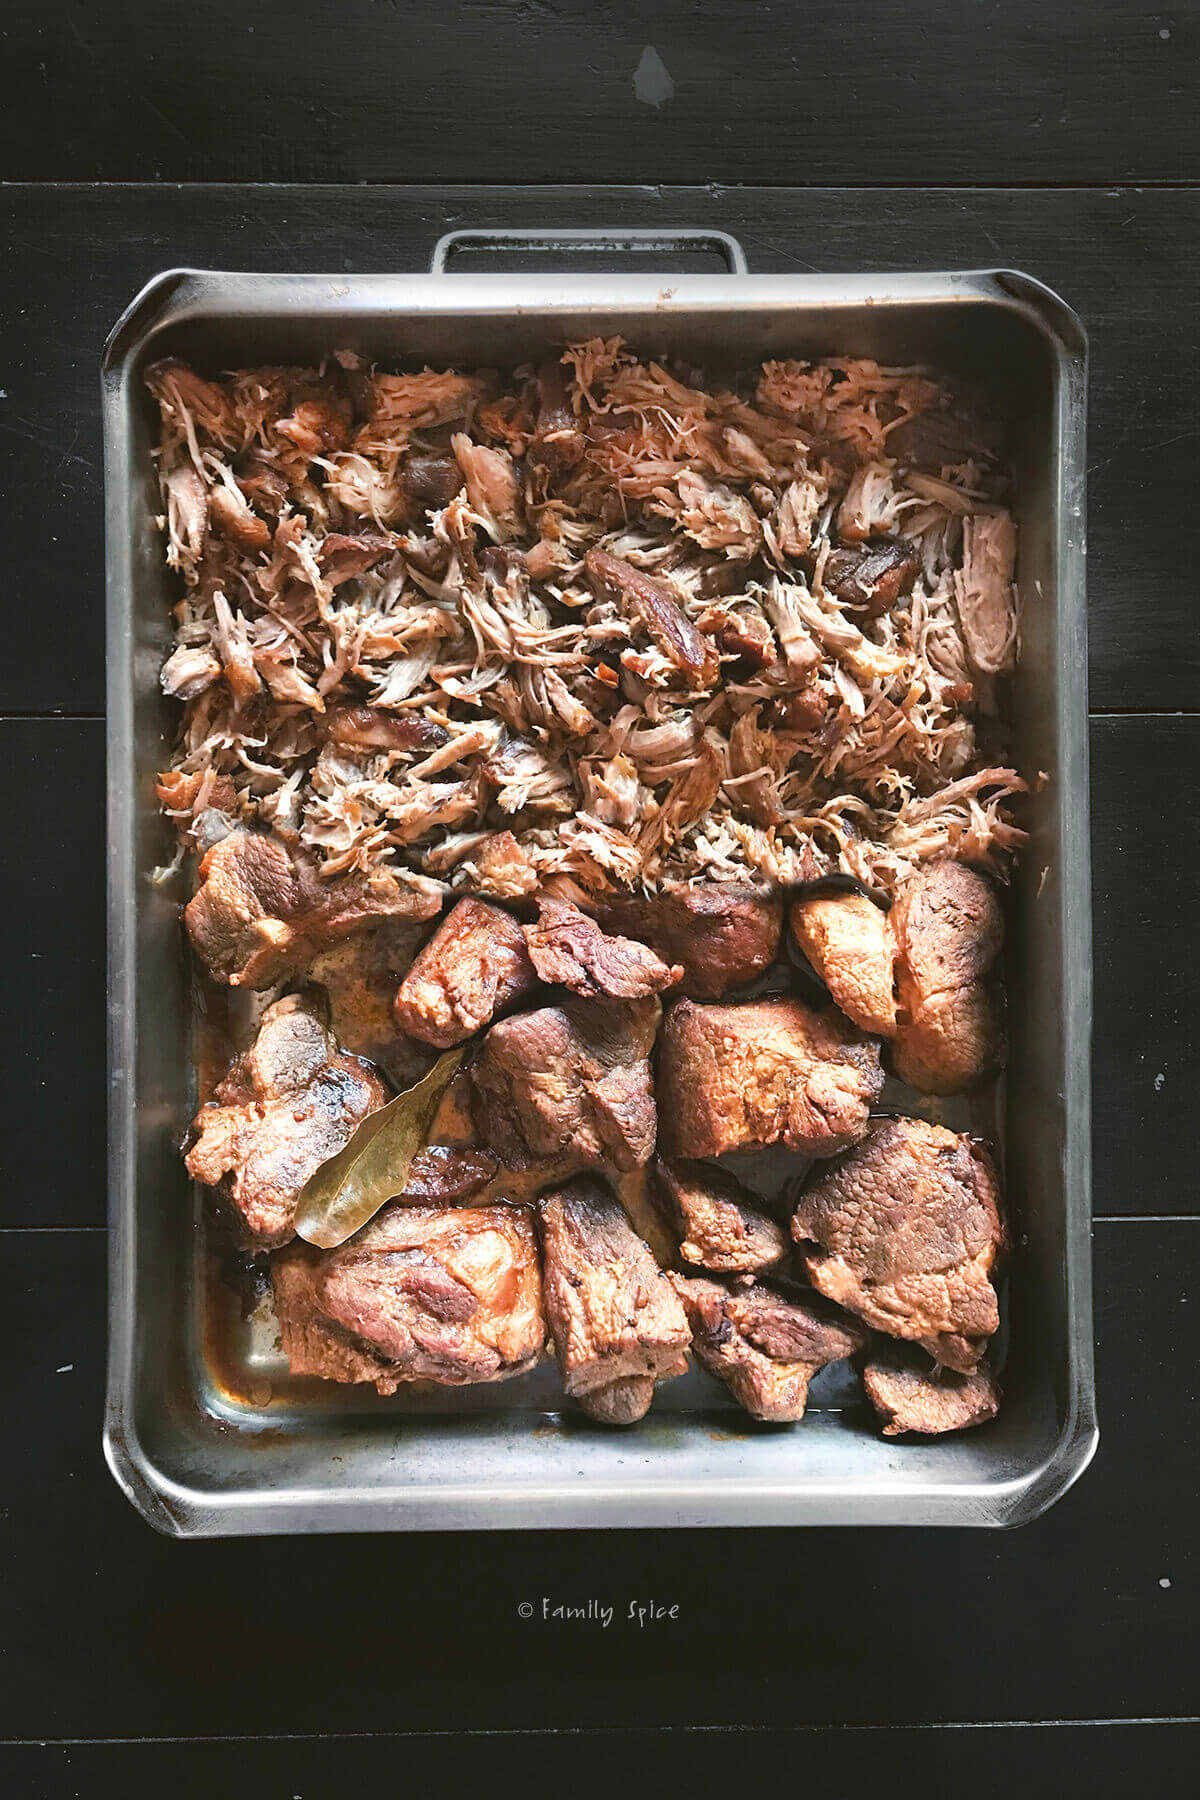 Overhead view of a roasting pan half filled with roasted pork shoulder and half filled with shredded pulled pork